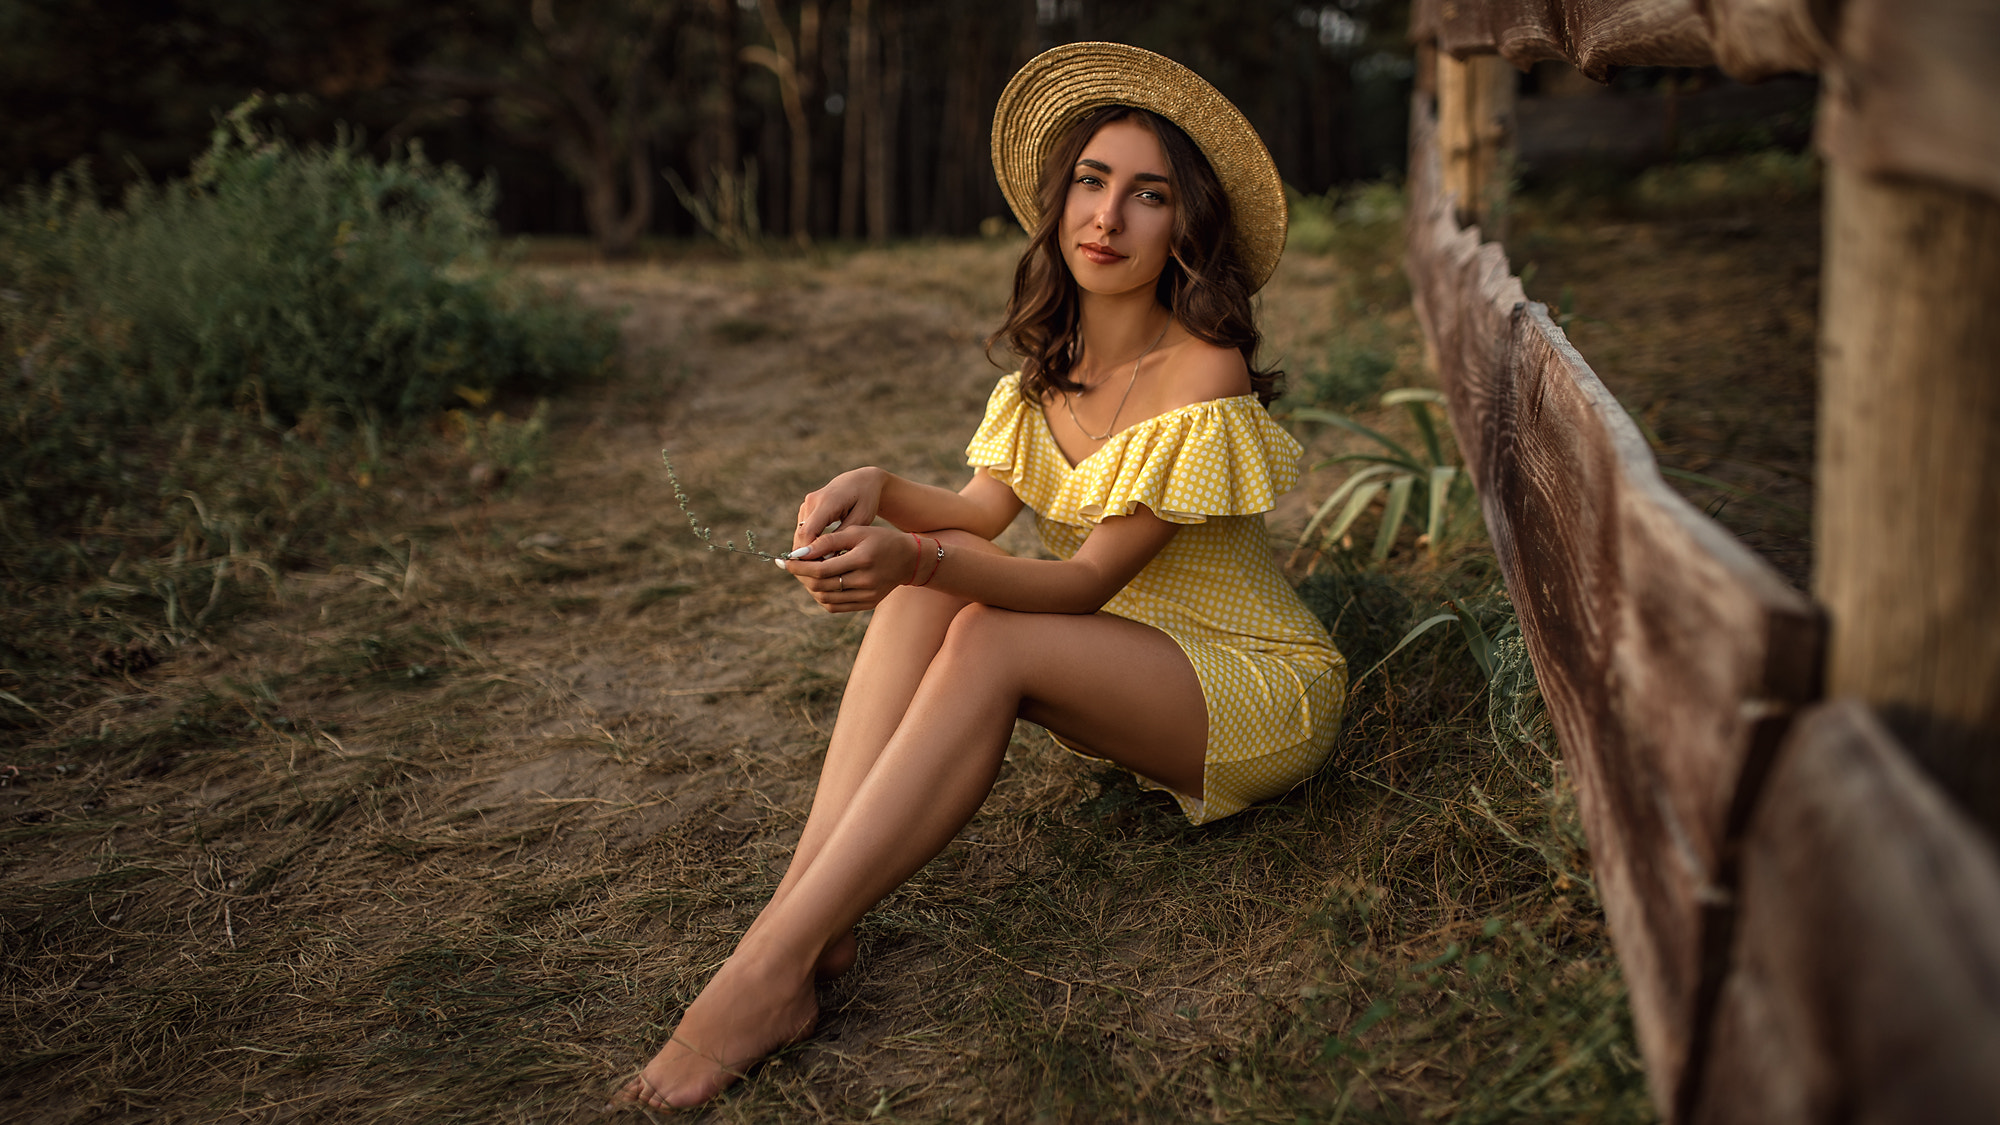 People 2000x1125 women skinny yellow dress women outdoors brunette polka dots hat fence necklace smiling trees sitting pointed toes